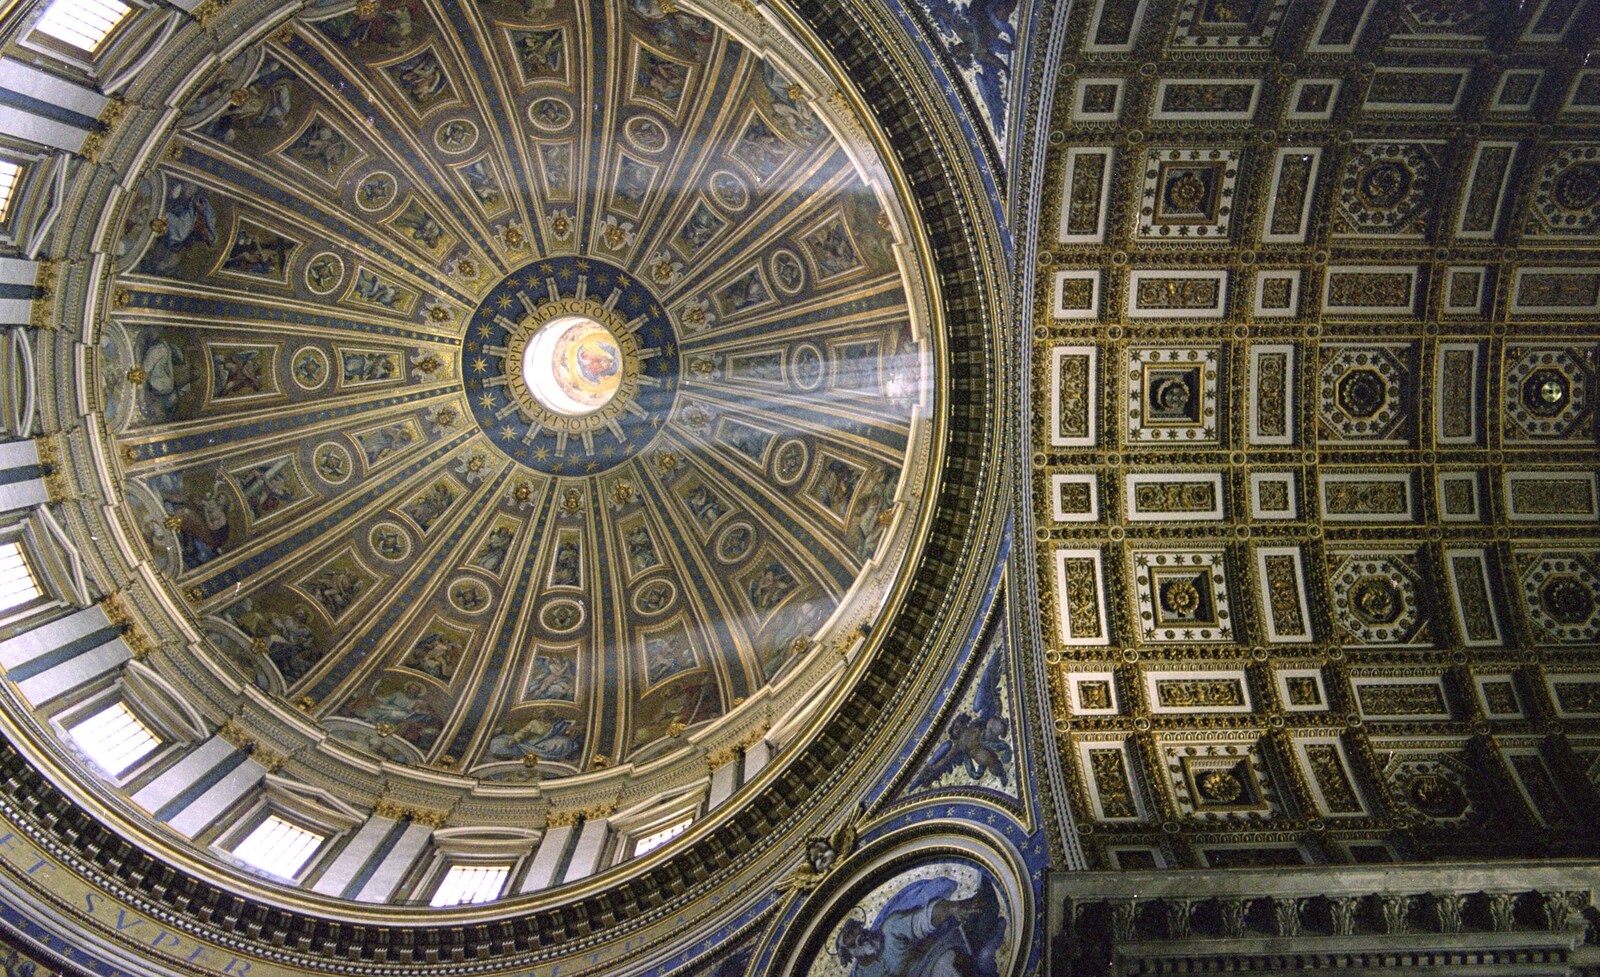 The dome of St. Peter's Basillica from A Working Trip to Rome, Italy - 10th September 1999